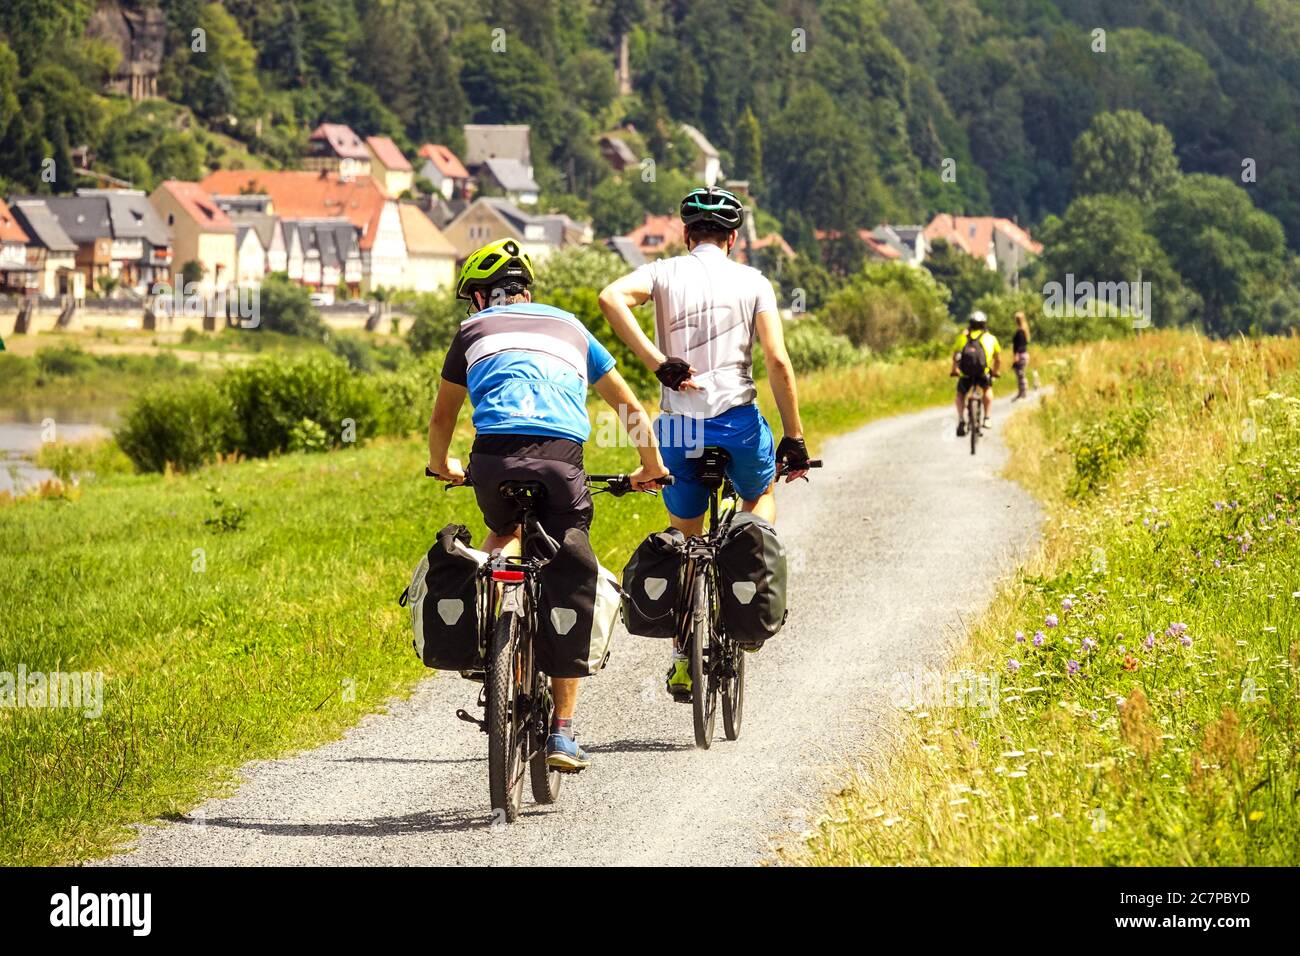 Cyclists on the Elberadweg, a cycle path leading through a valley along the Elbe river, Saxon Switzerland Germany cyclists, Elbe cycle route Stock Photo